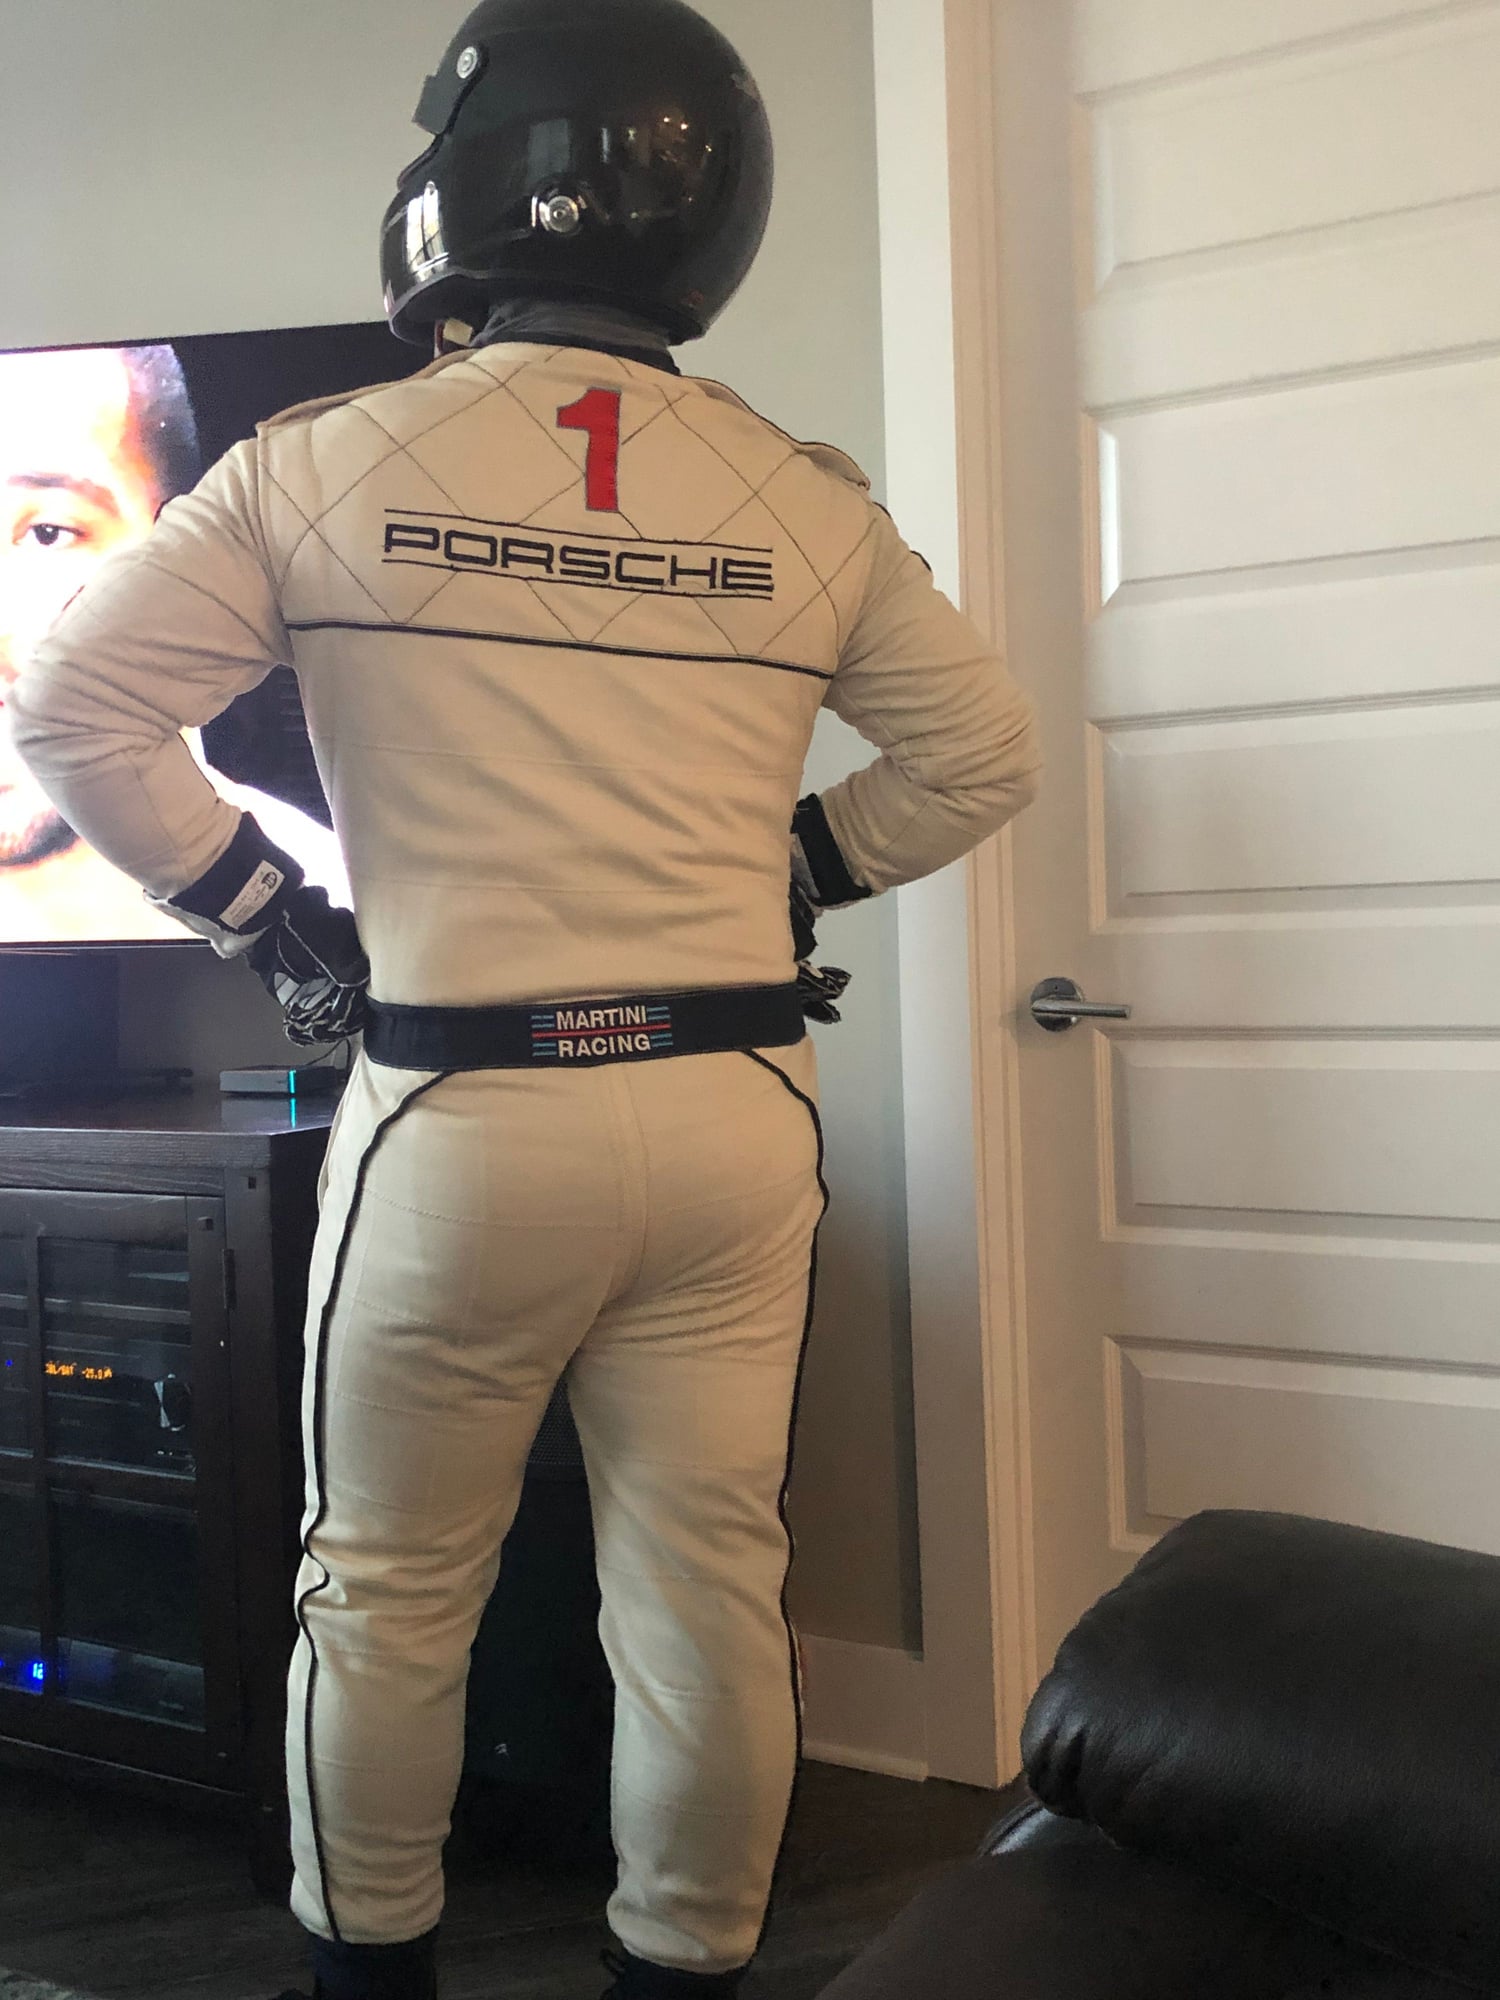 Miscellaneous - STAND21 Porsche Race Suit Driven Motorsports gloves and SPARCO SHIELD RW-9 balaclavas - Used - All Years Any Make All Models - Atlanta, GA 30339, United States